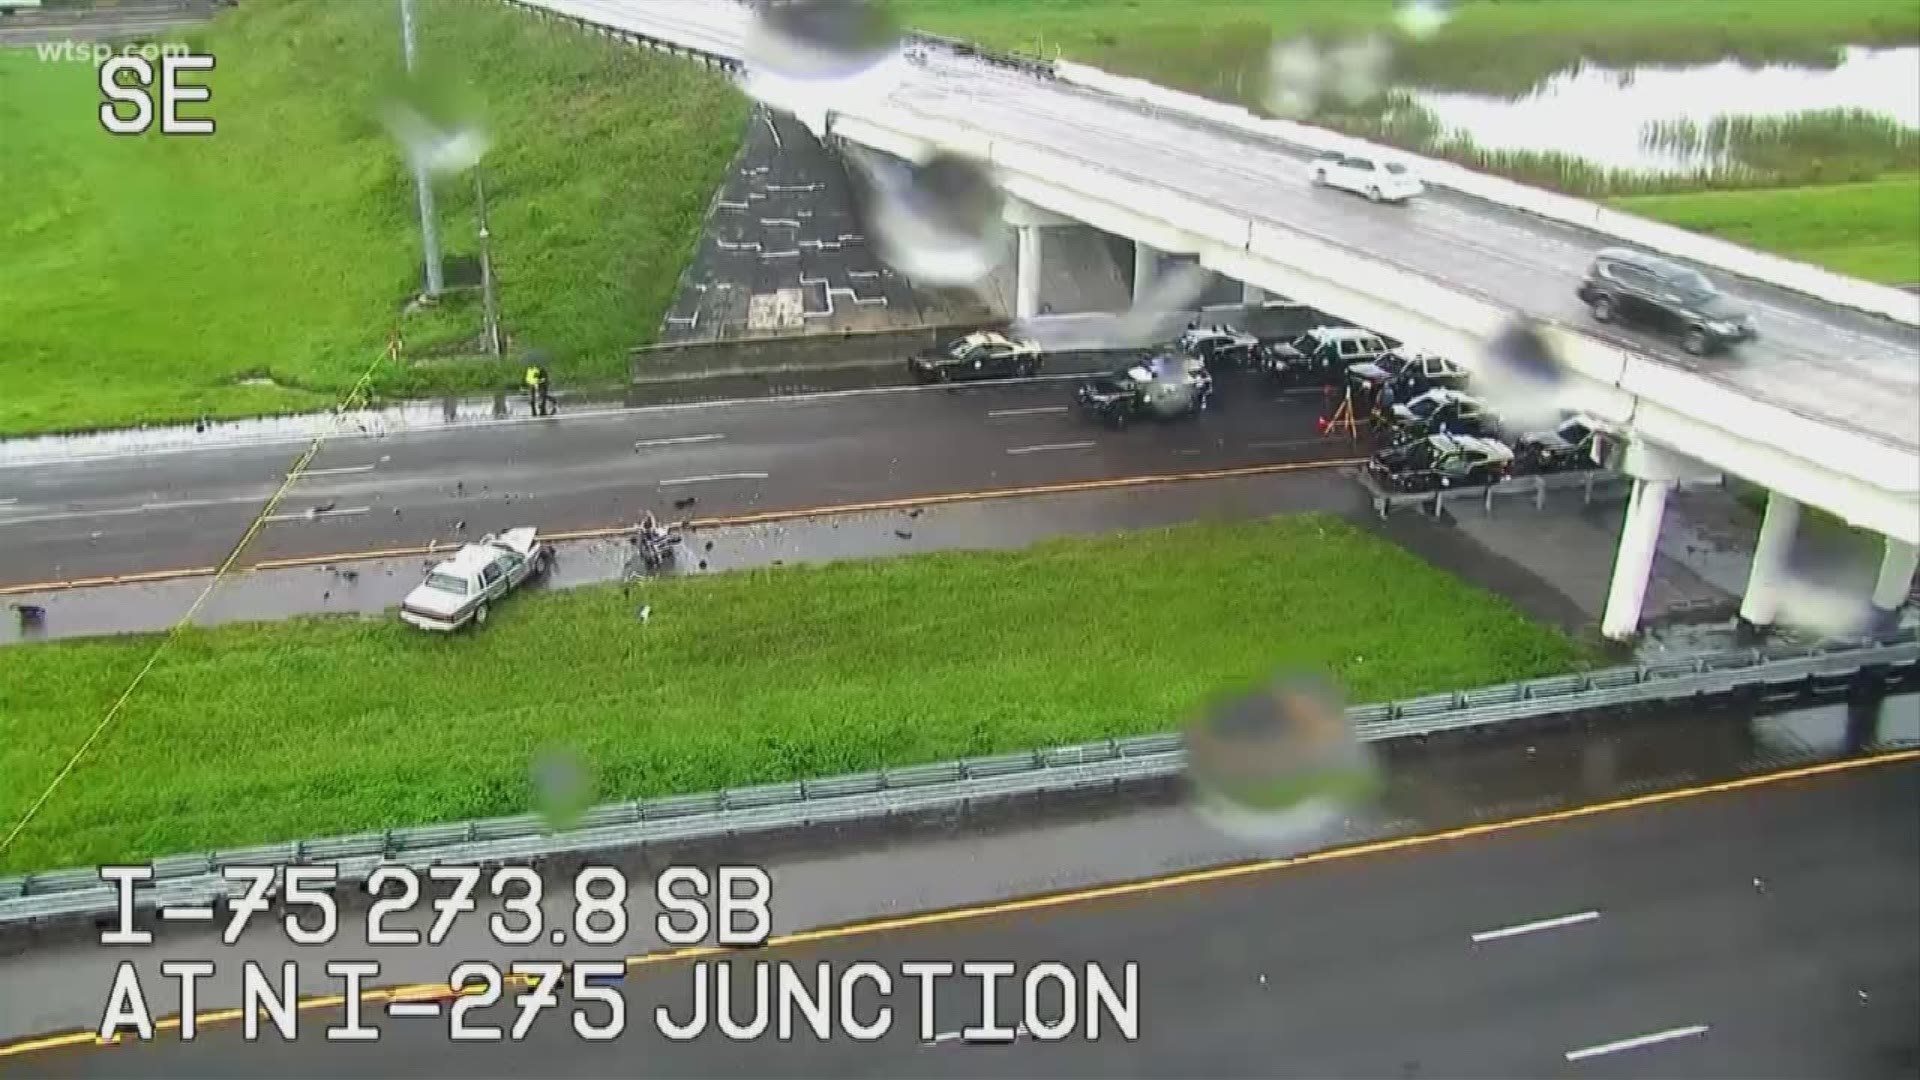 A wrong-way crash led to a motorcyclist's death Wednesday on Interstate 75 near the Hillsborough/Pasco County line, the Florida Highway Patrol said.

Troopers said a 1994 Lincoln Town Car was headed south in the northbound lanes of the interstate after making a U-turn from the I-275 entrance ramp.

The Lincoln hit a 2012 Harley Davidson motorcycle head-on near County Line Road, troopers said.